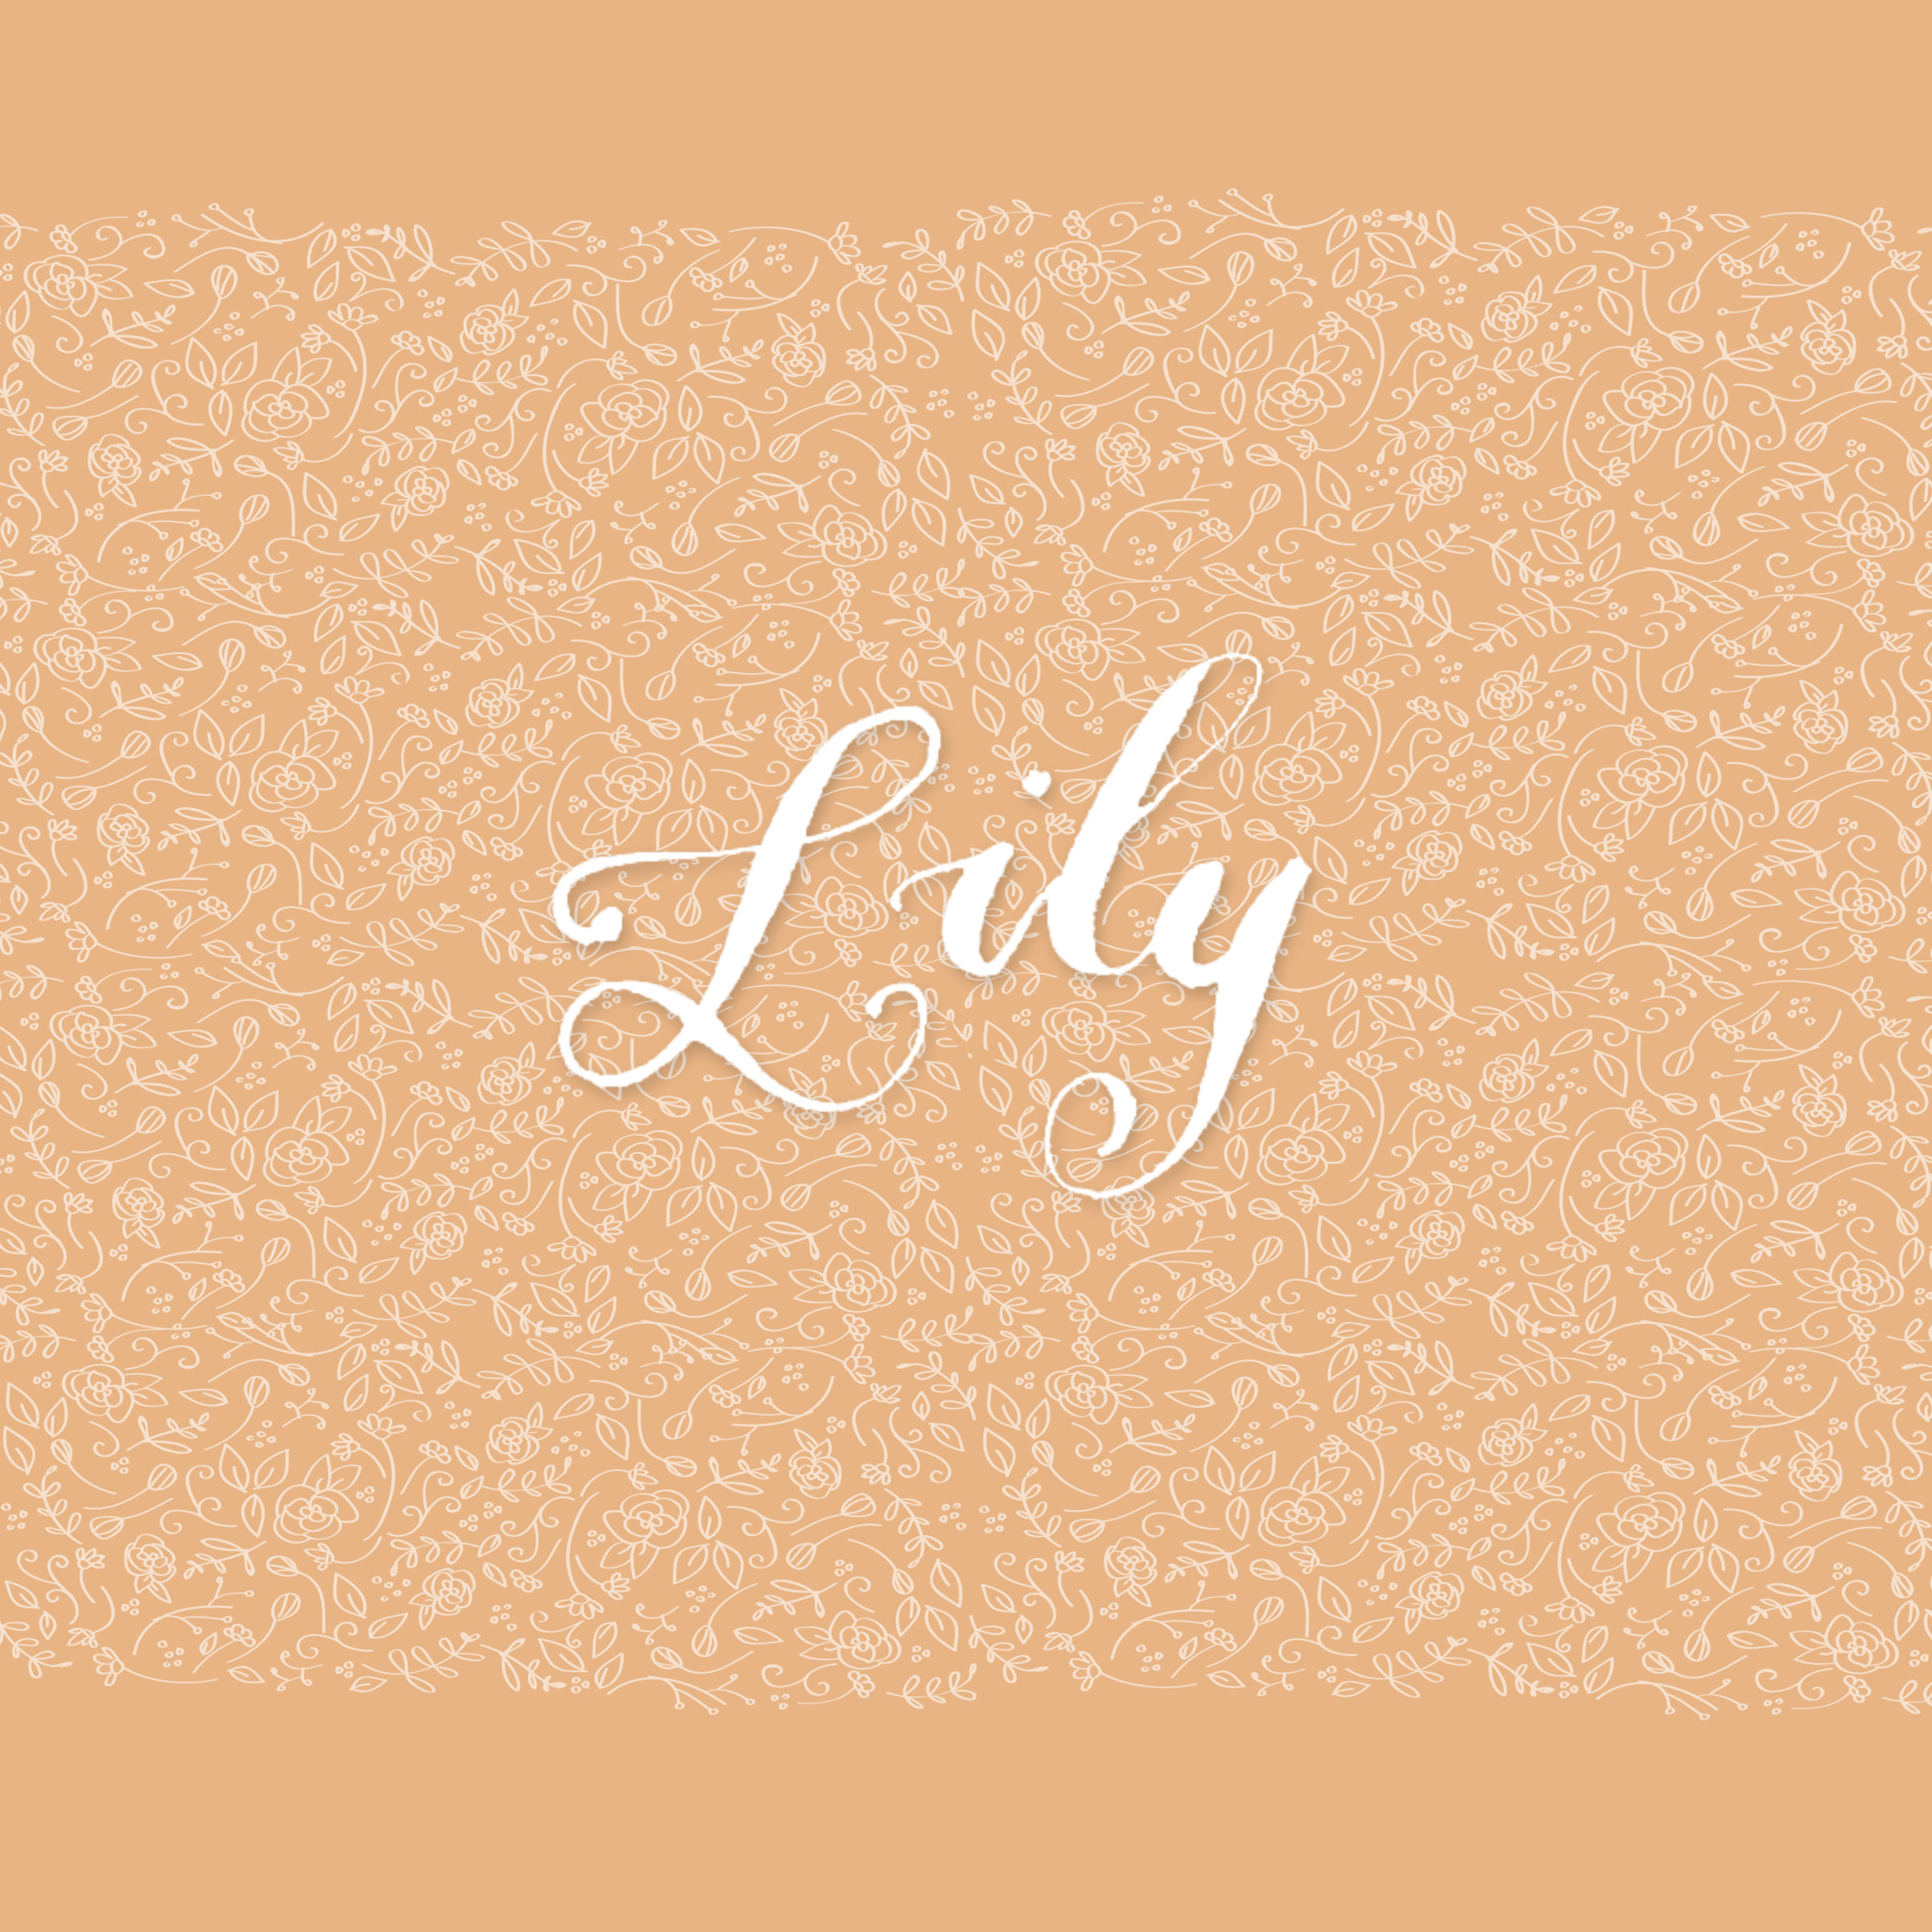 CalligraphyBadges_Lily.jpg